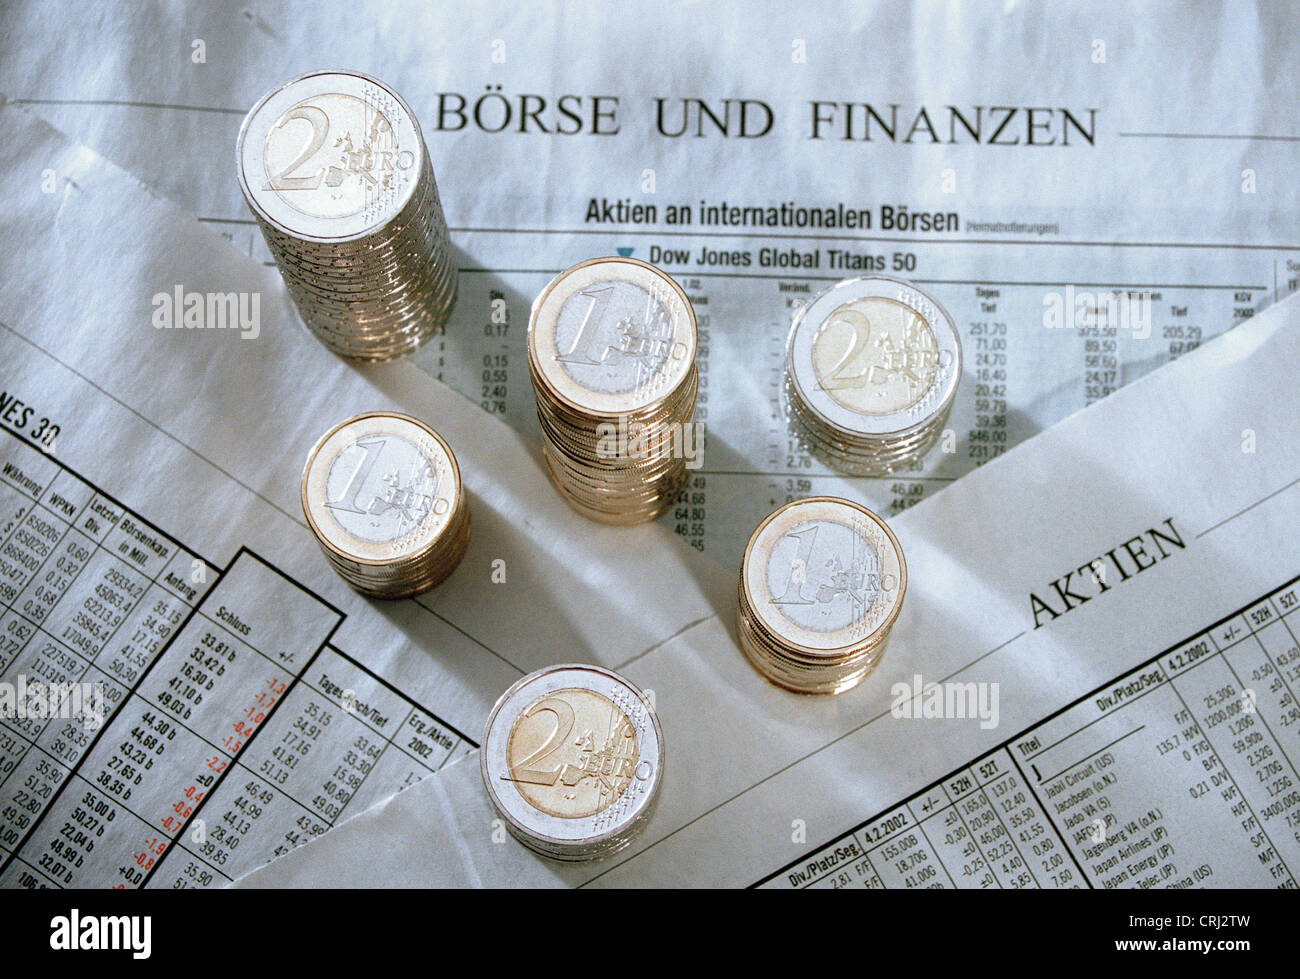 Stack of Euromuenzen on a newspaper page with stock market developments Stock Photo